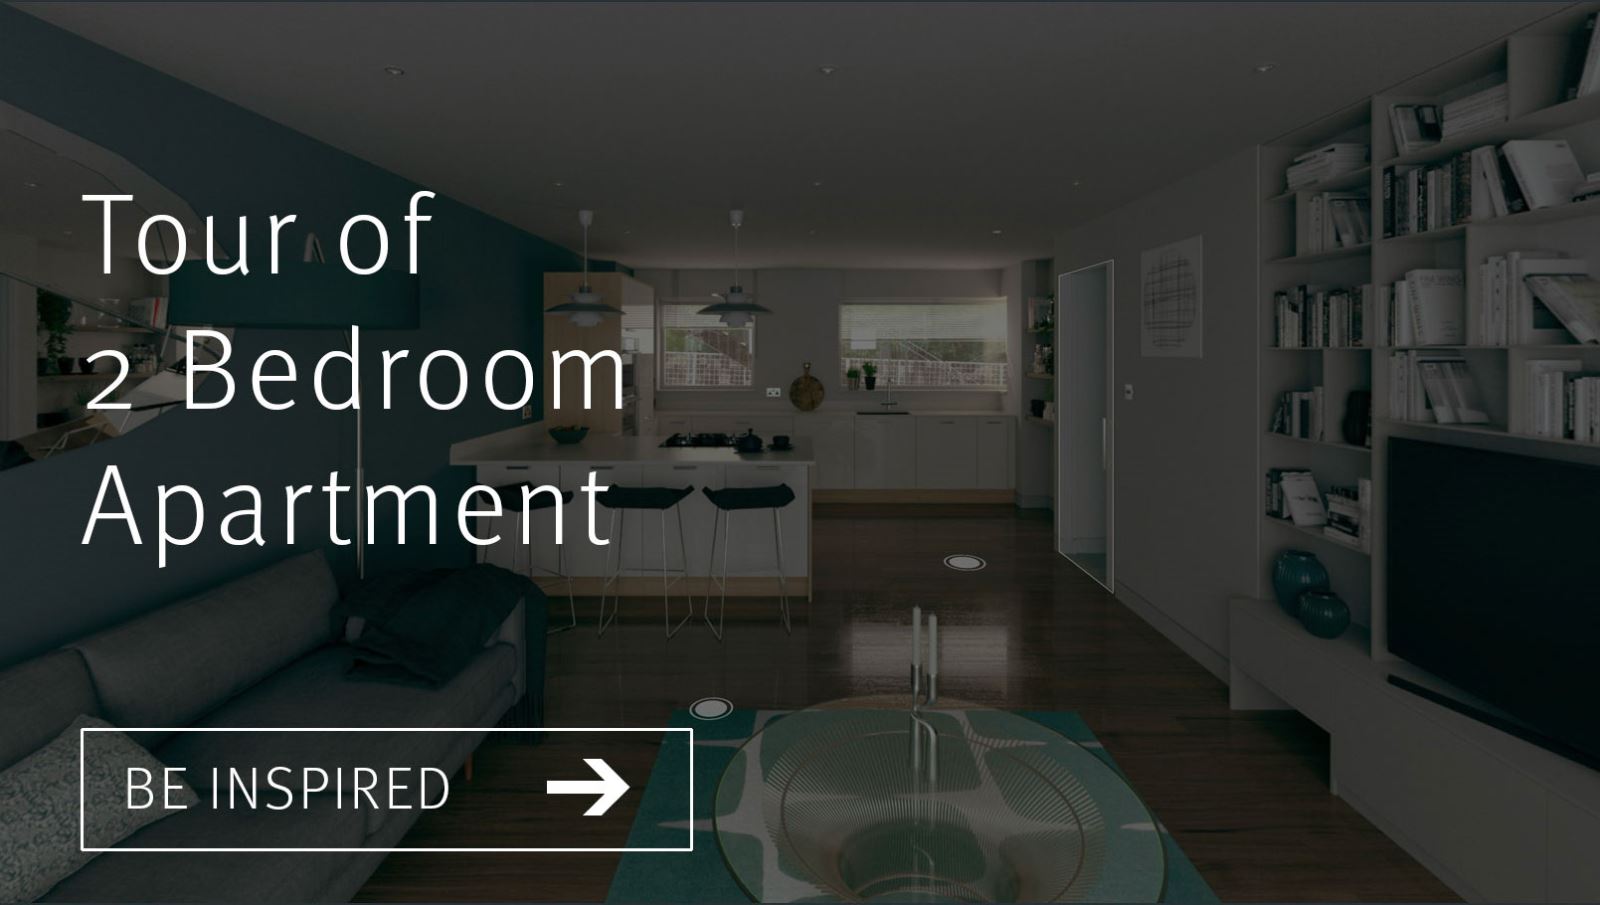 Tour of 2 bedroom apartment